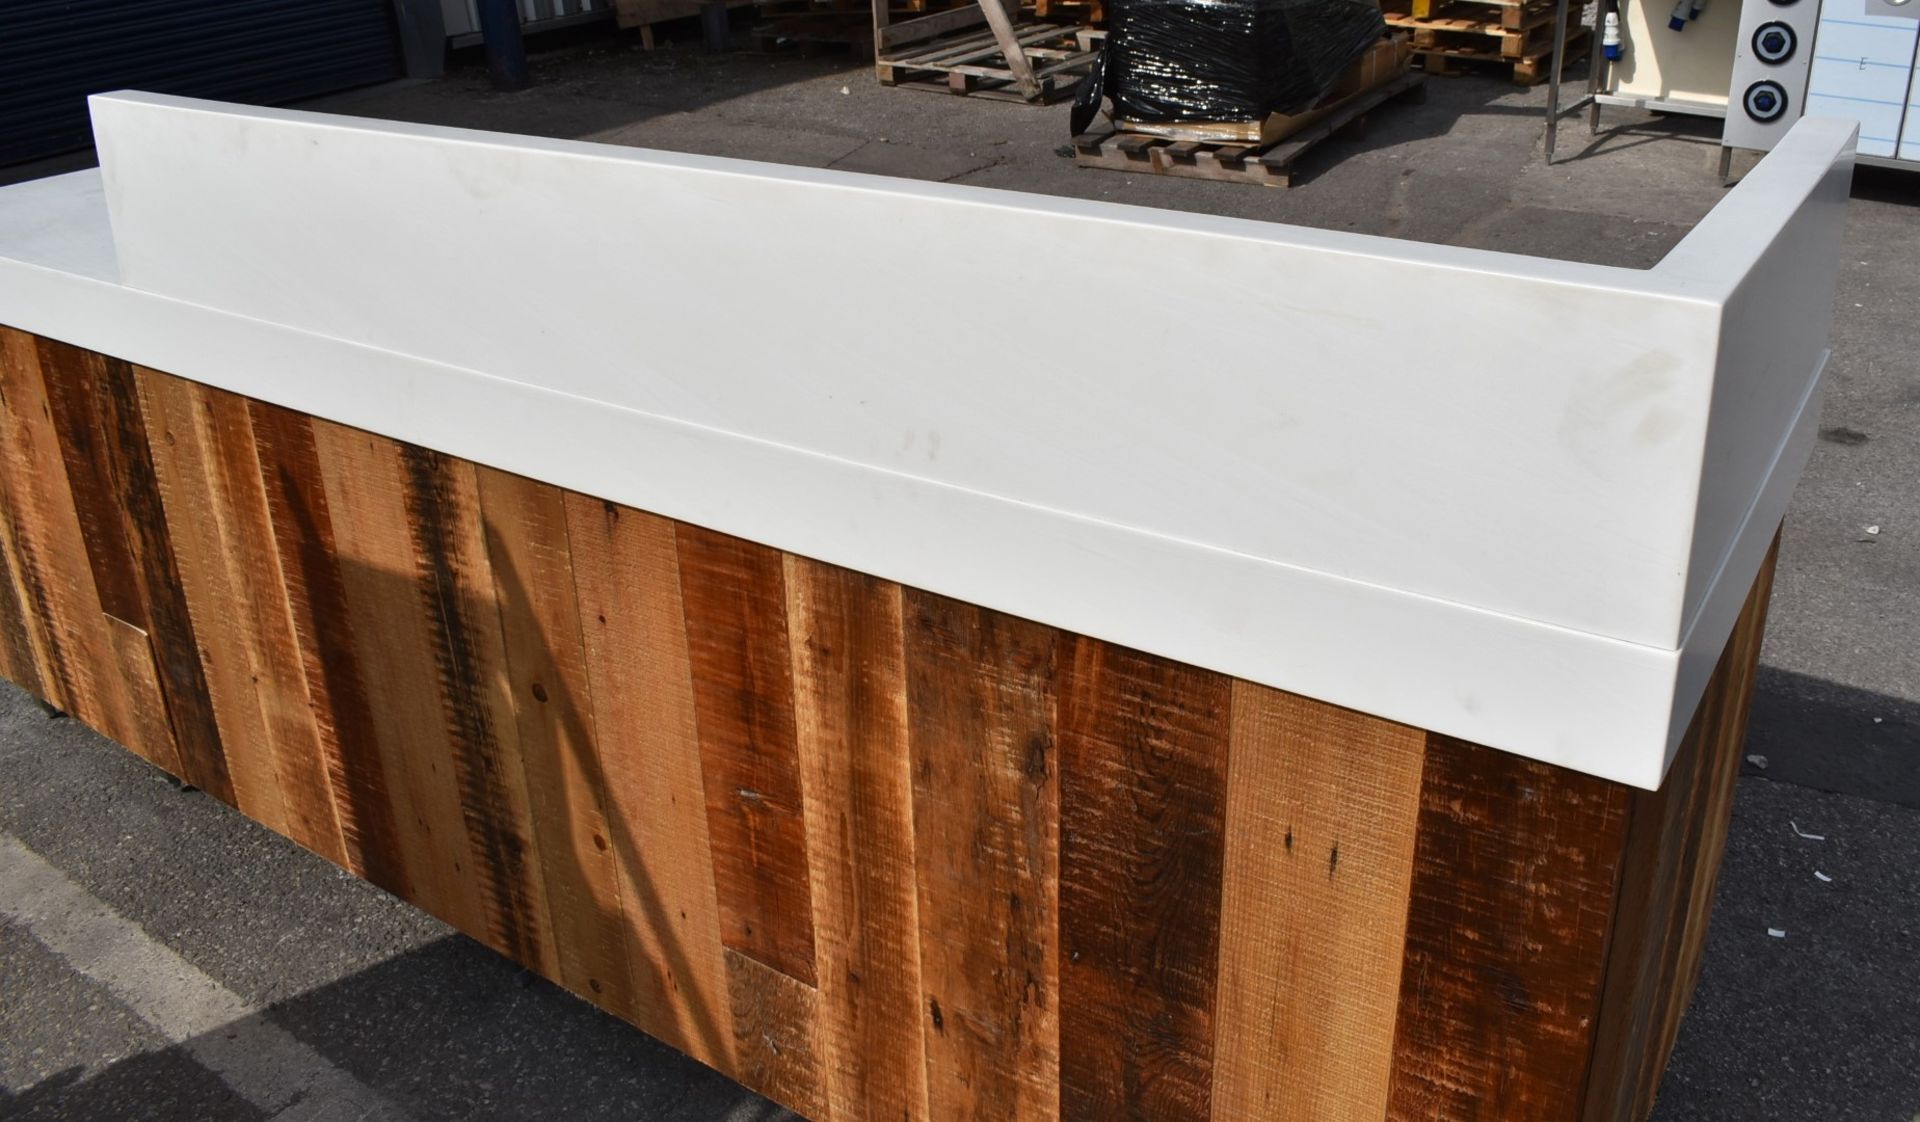 1 x Commercial Coffee Shop Preperation Counter With Natural Wooden Fascia, Hard Wearing Hygenic - Image 20 of 21